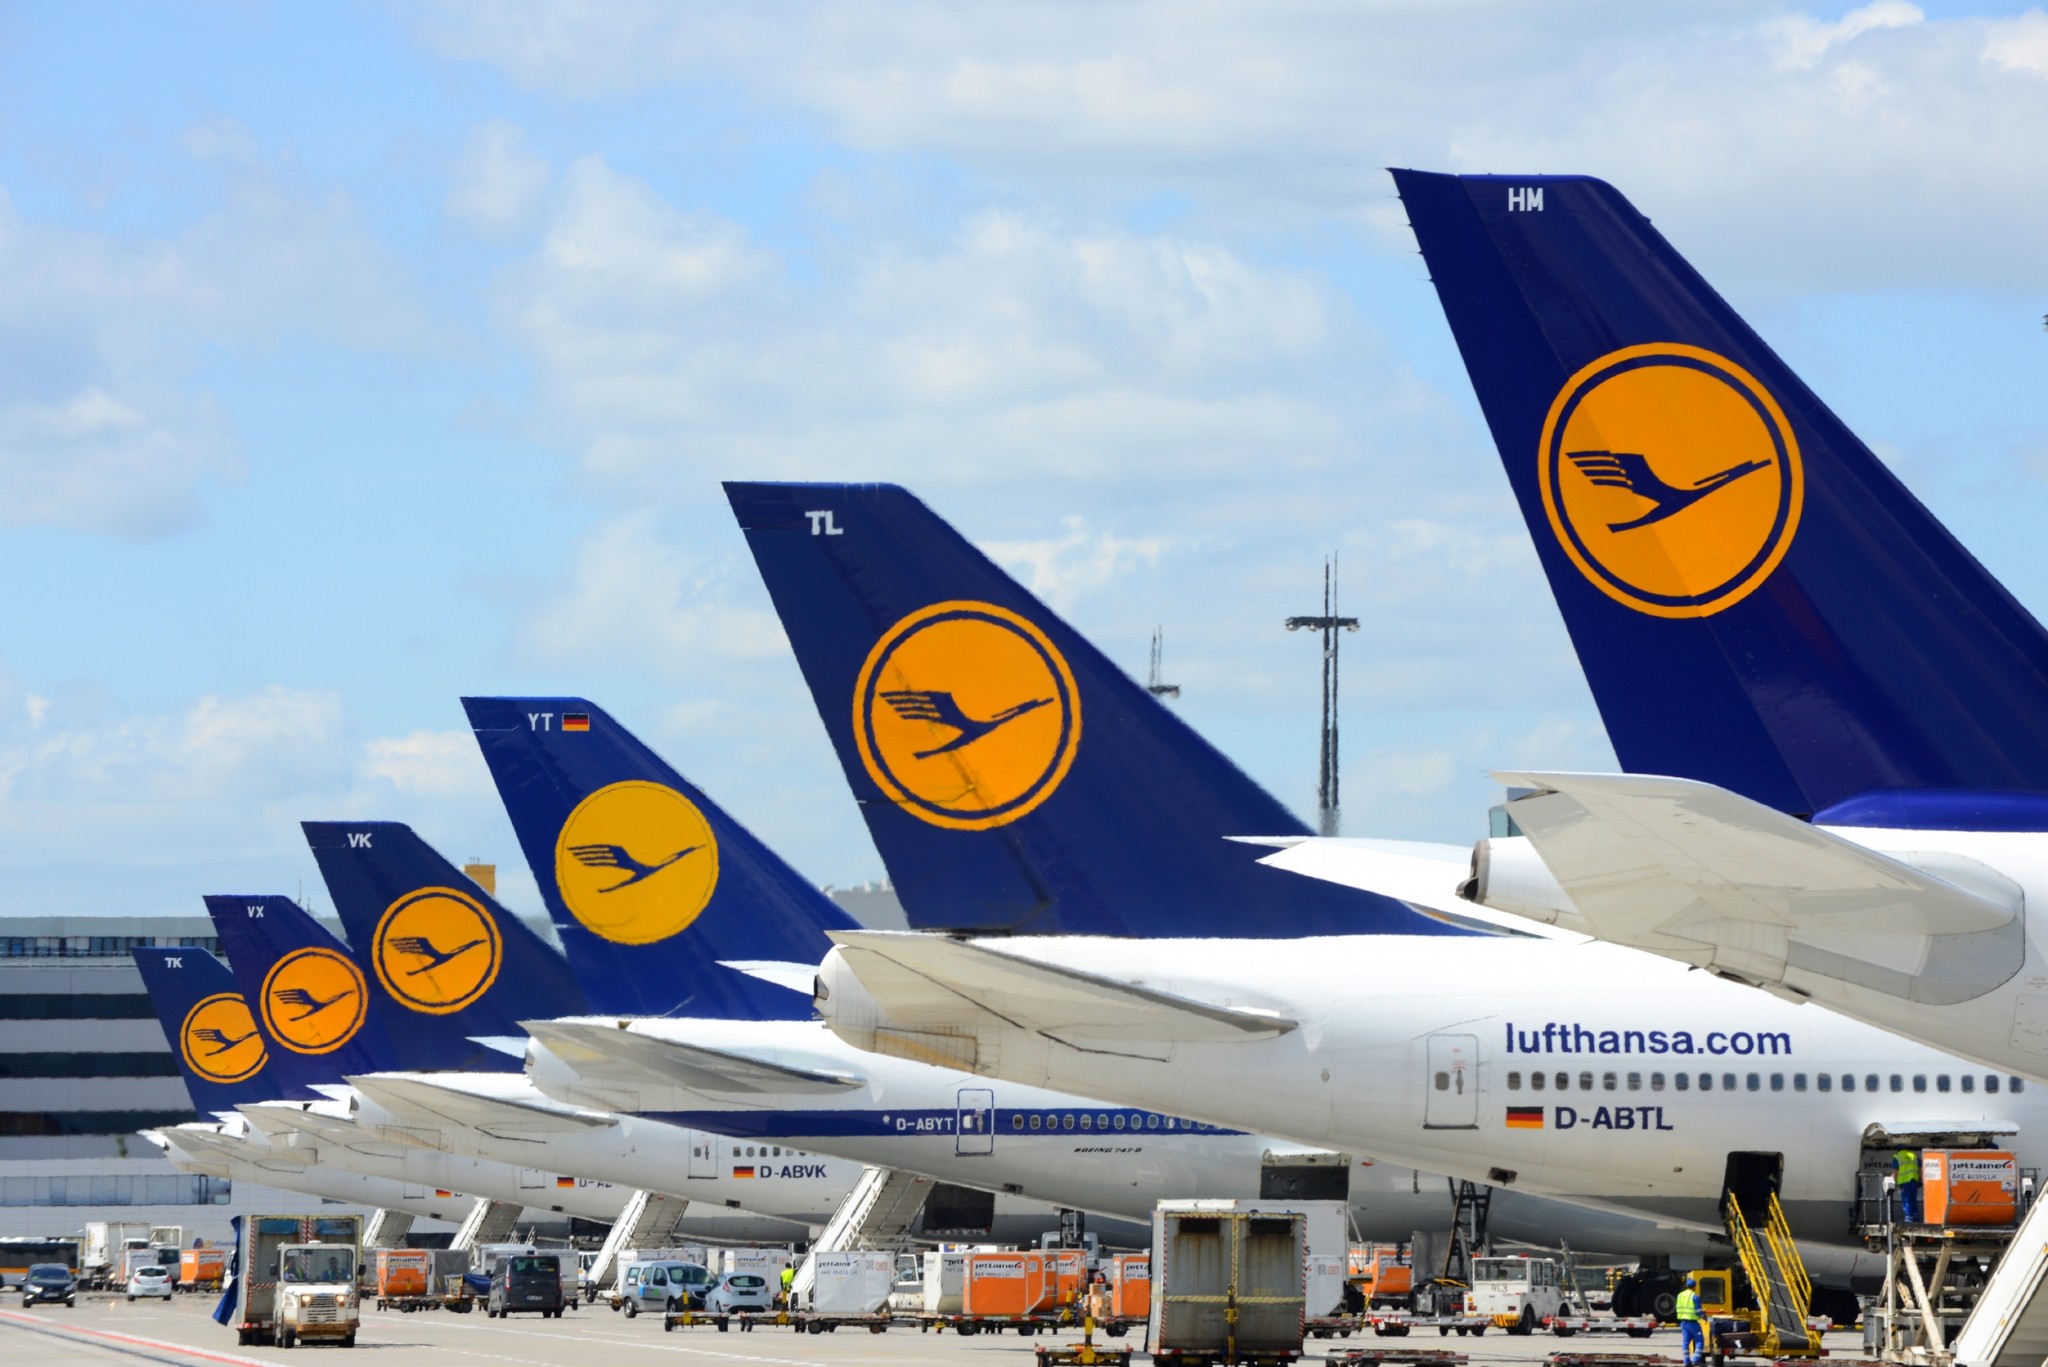 Lufthansa Group reports strong first quarter bookings